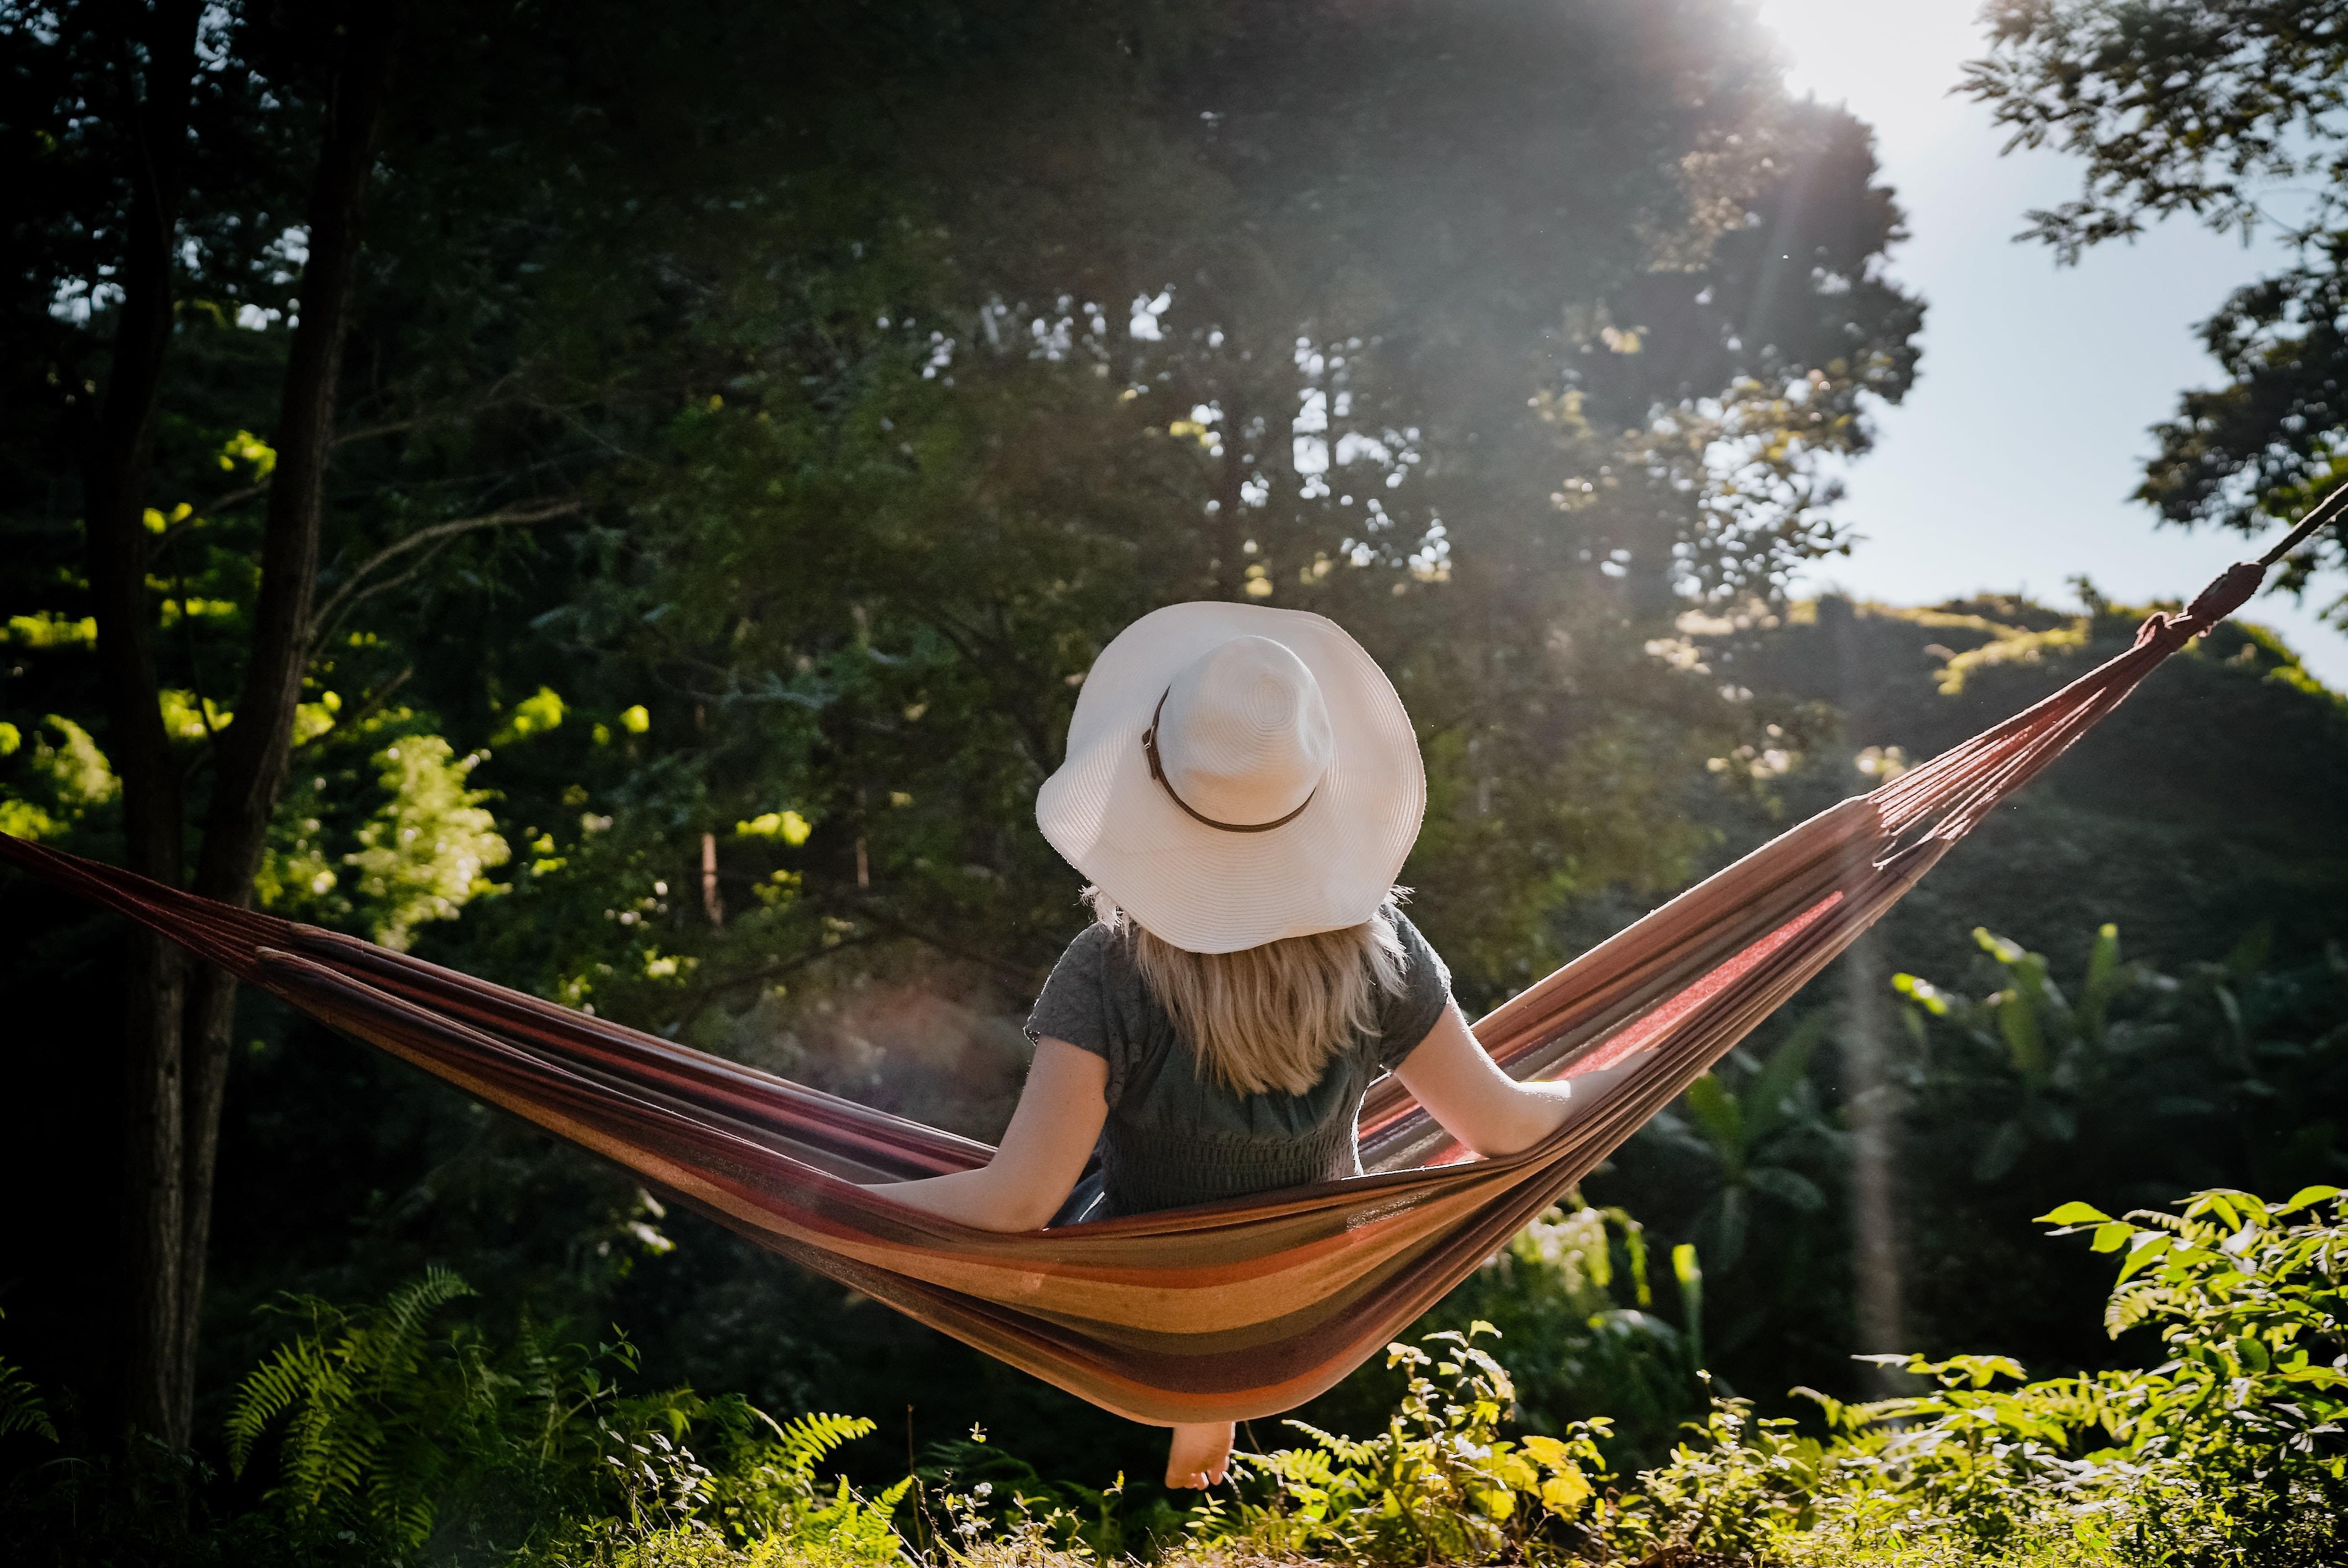 A woman wearing a white hat sitting in a hammock in a green park